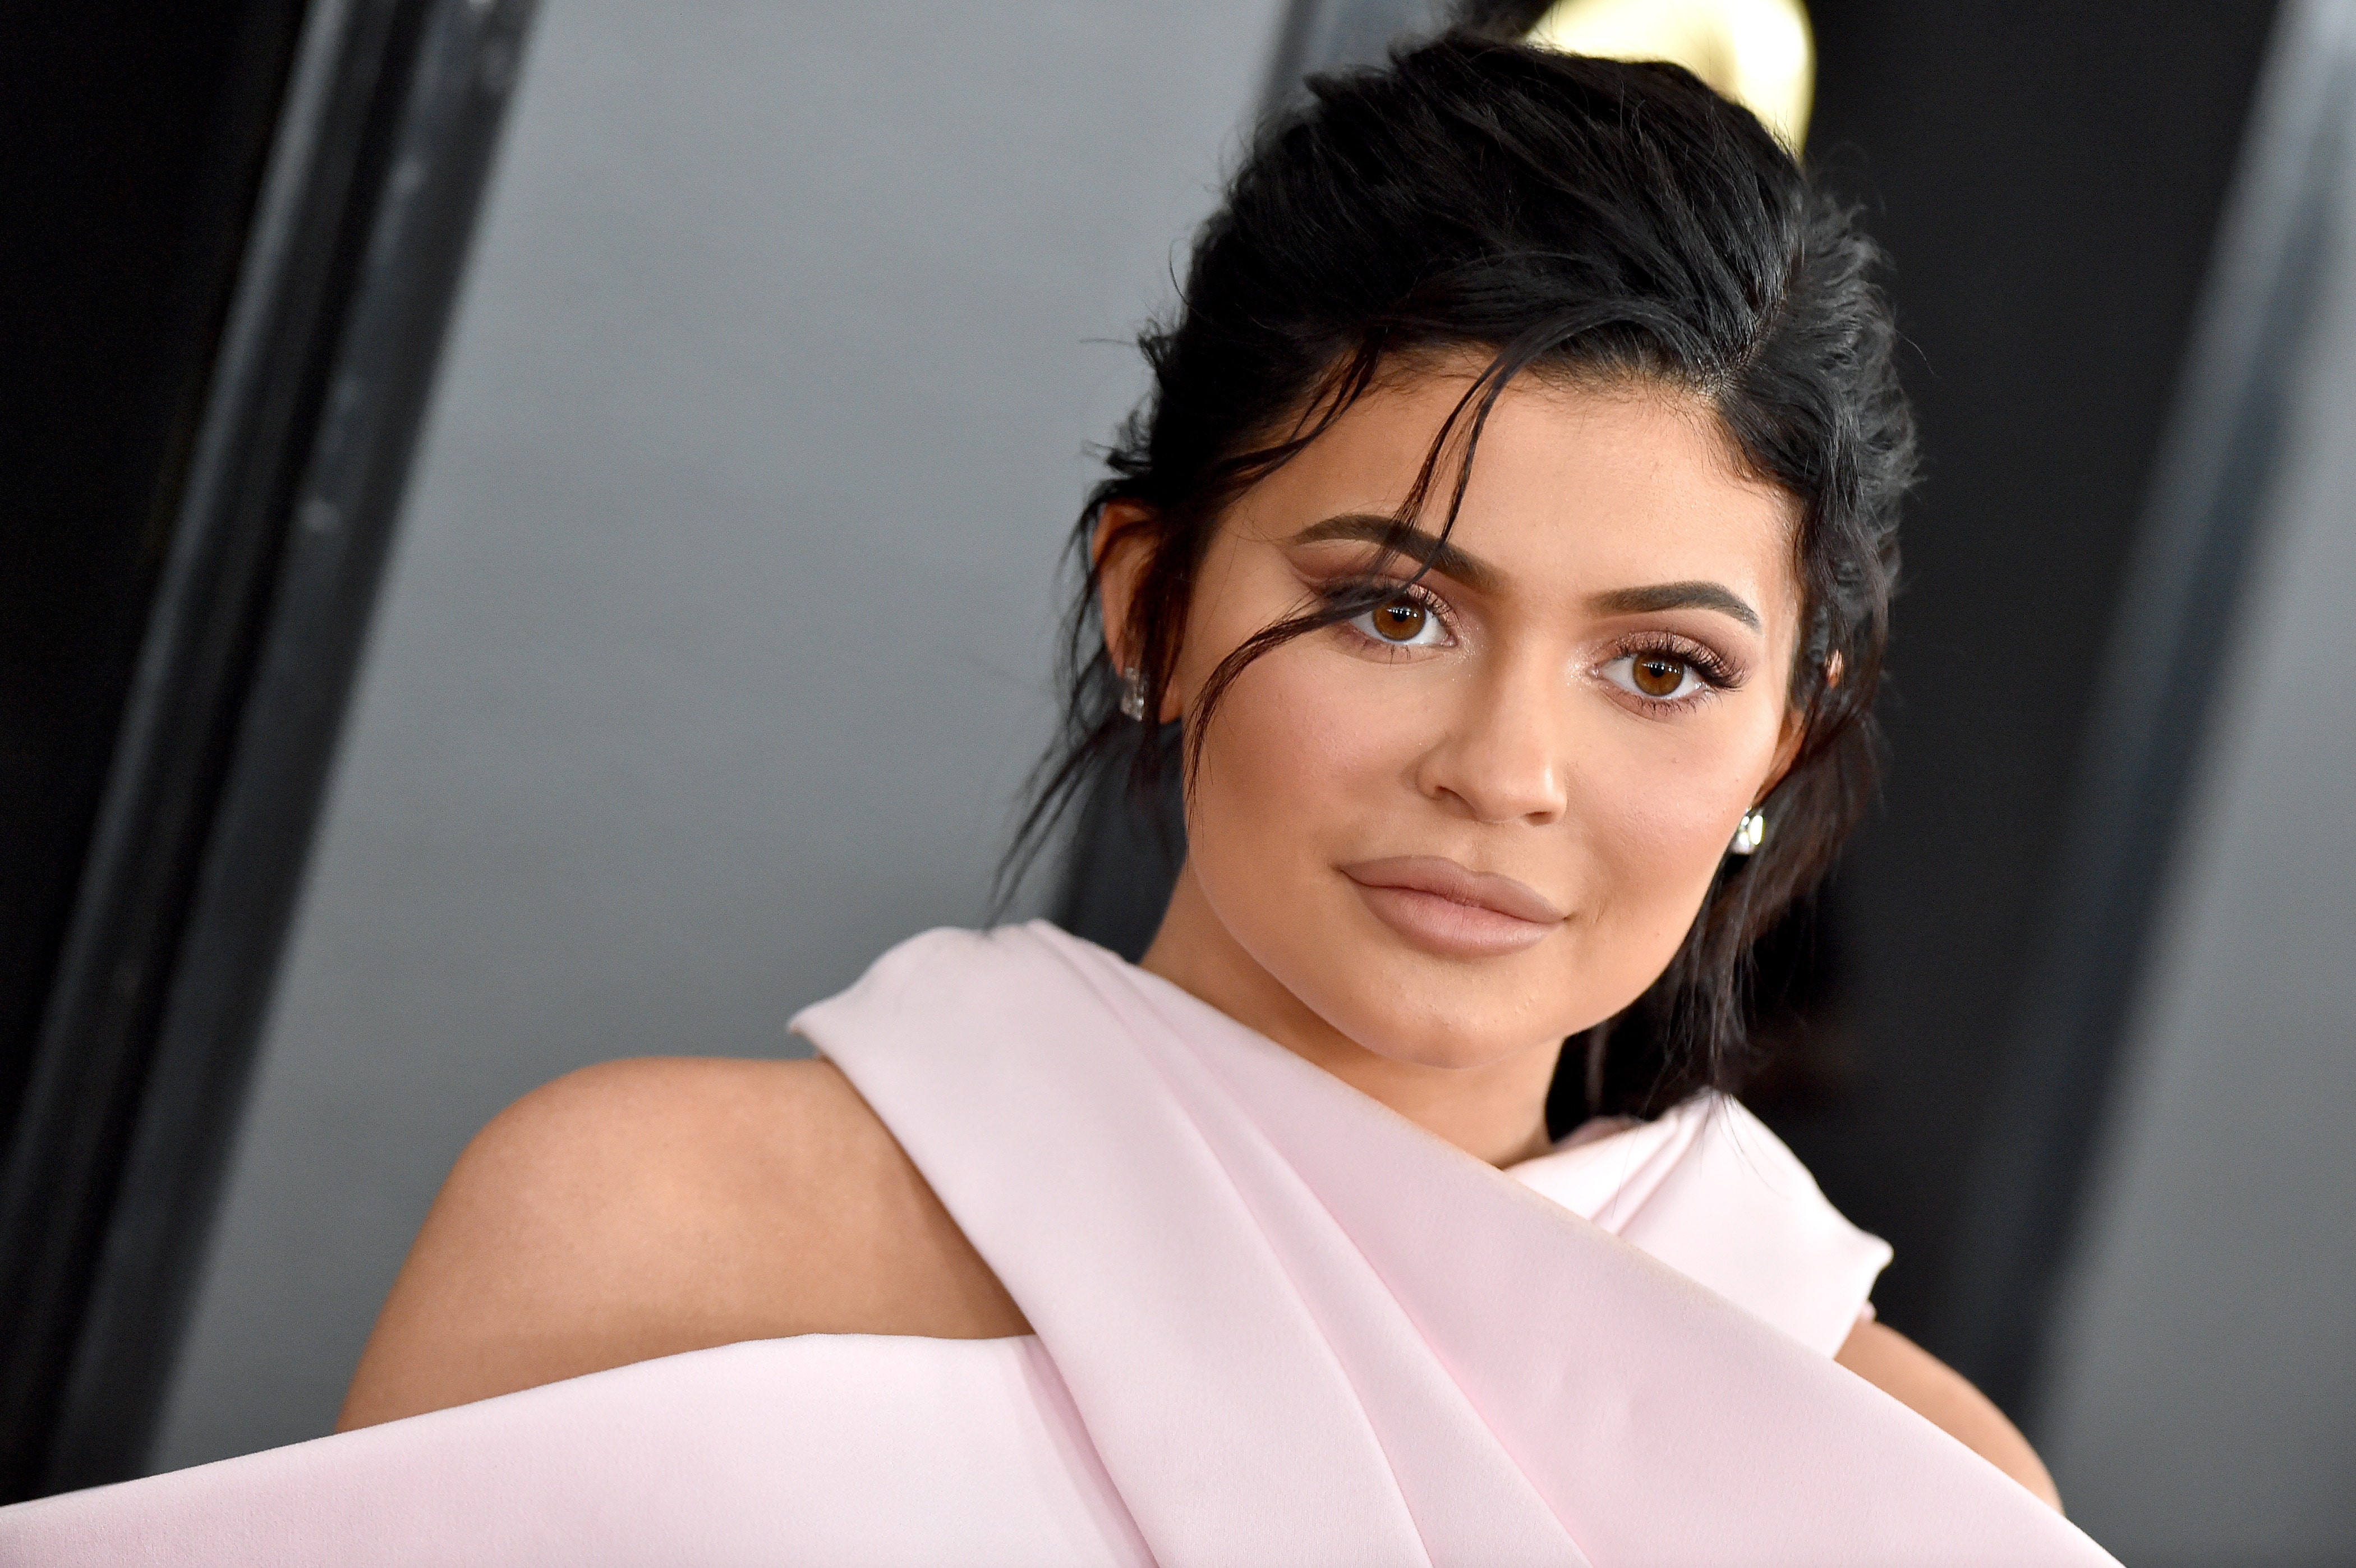 Kylie Jenner responds to the reaction after asking fans to make a donation to GoFundMe for the injured makeup artist